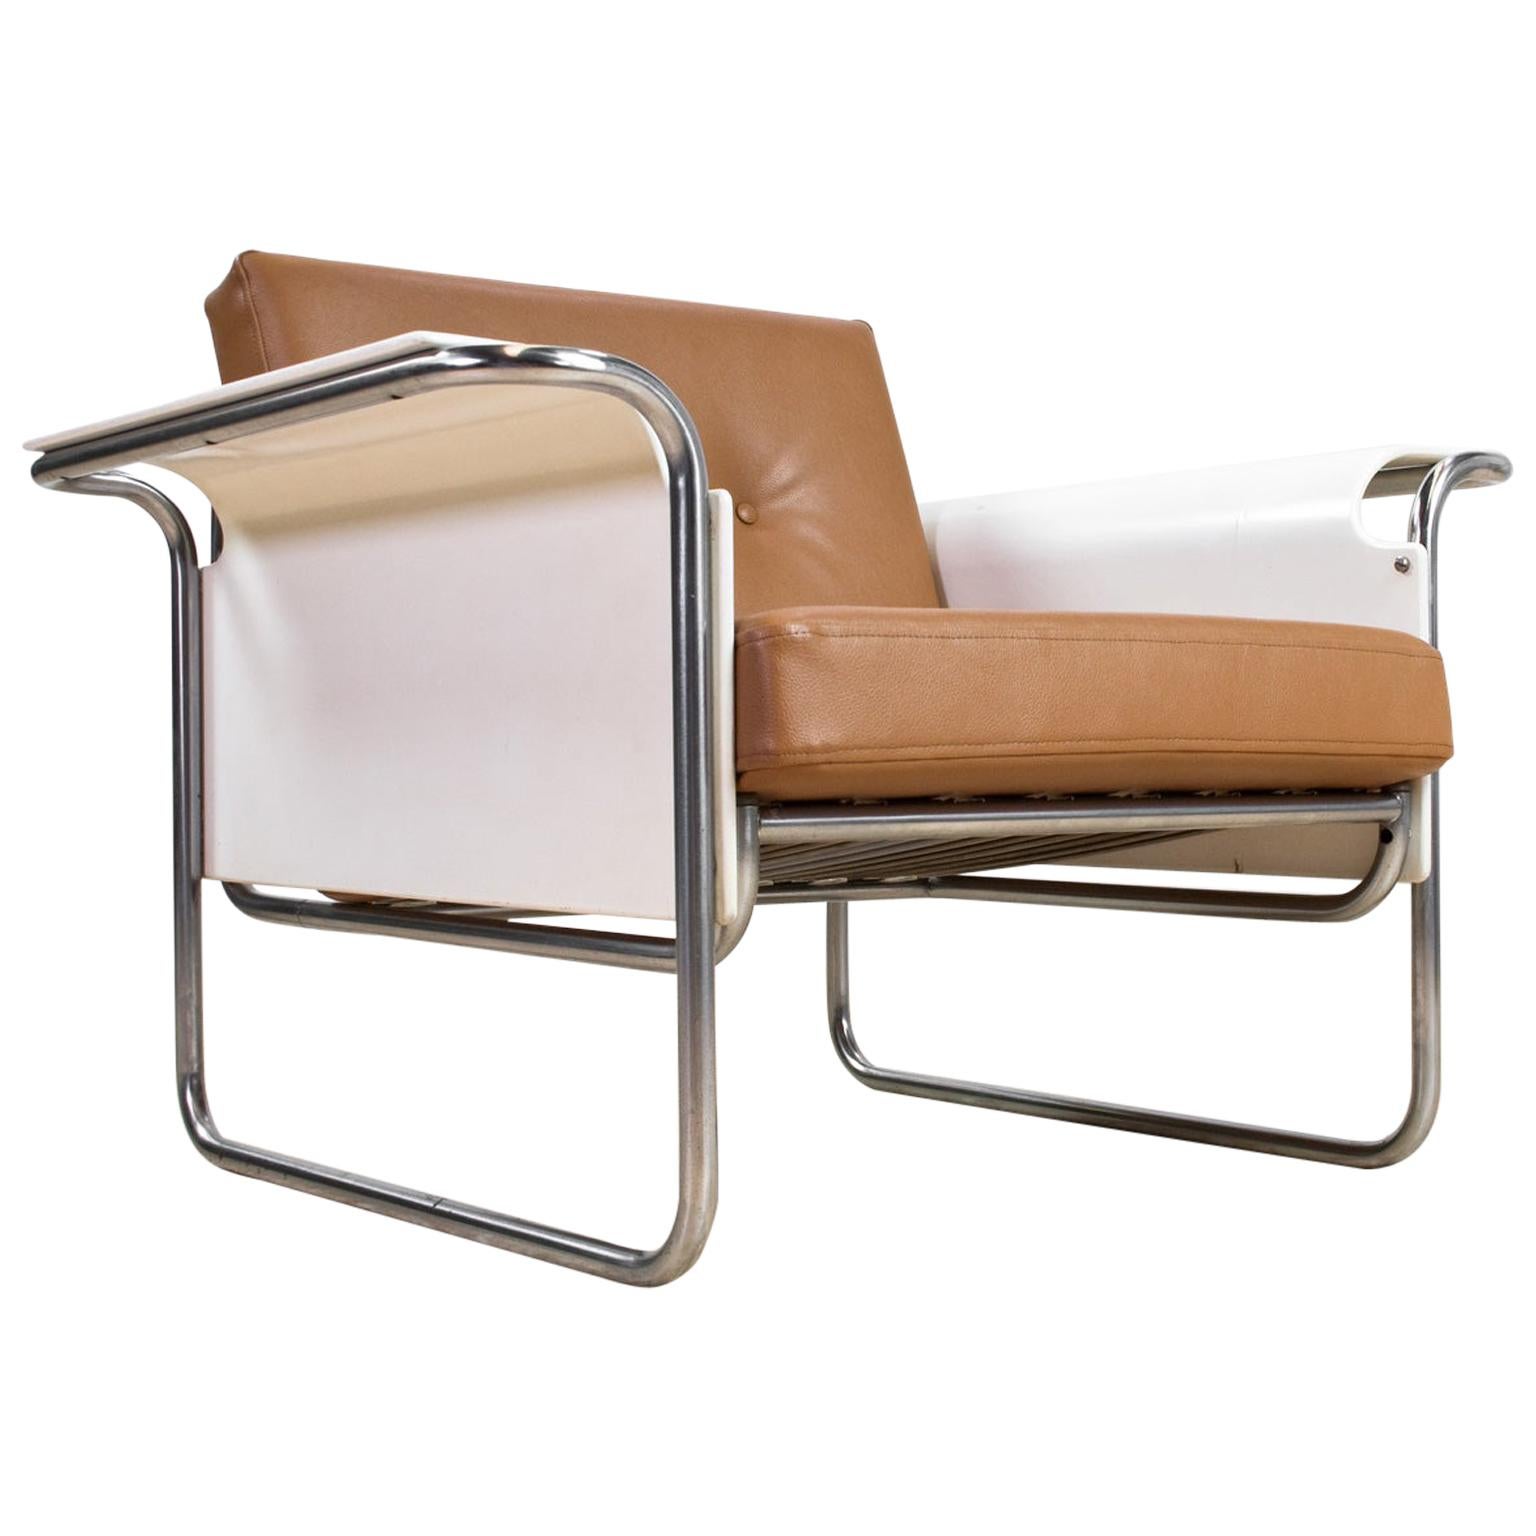 Scandinavian Modern Armchair in Faux Leather and Bent Plywood Armrests, 1950s